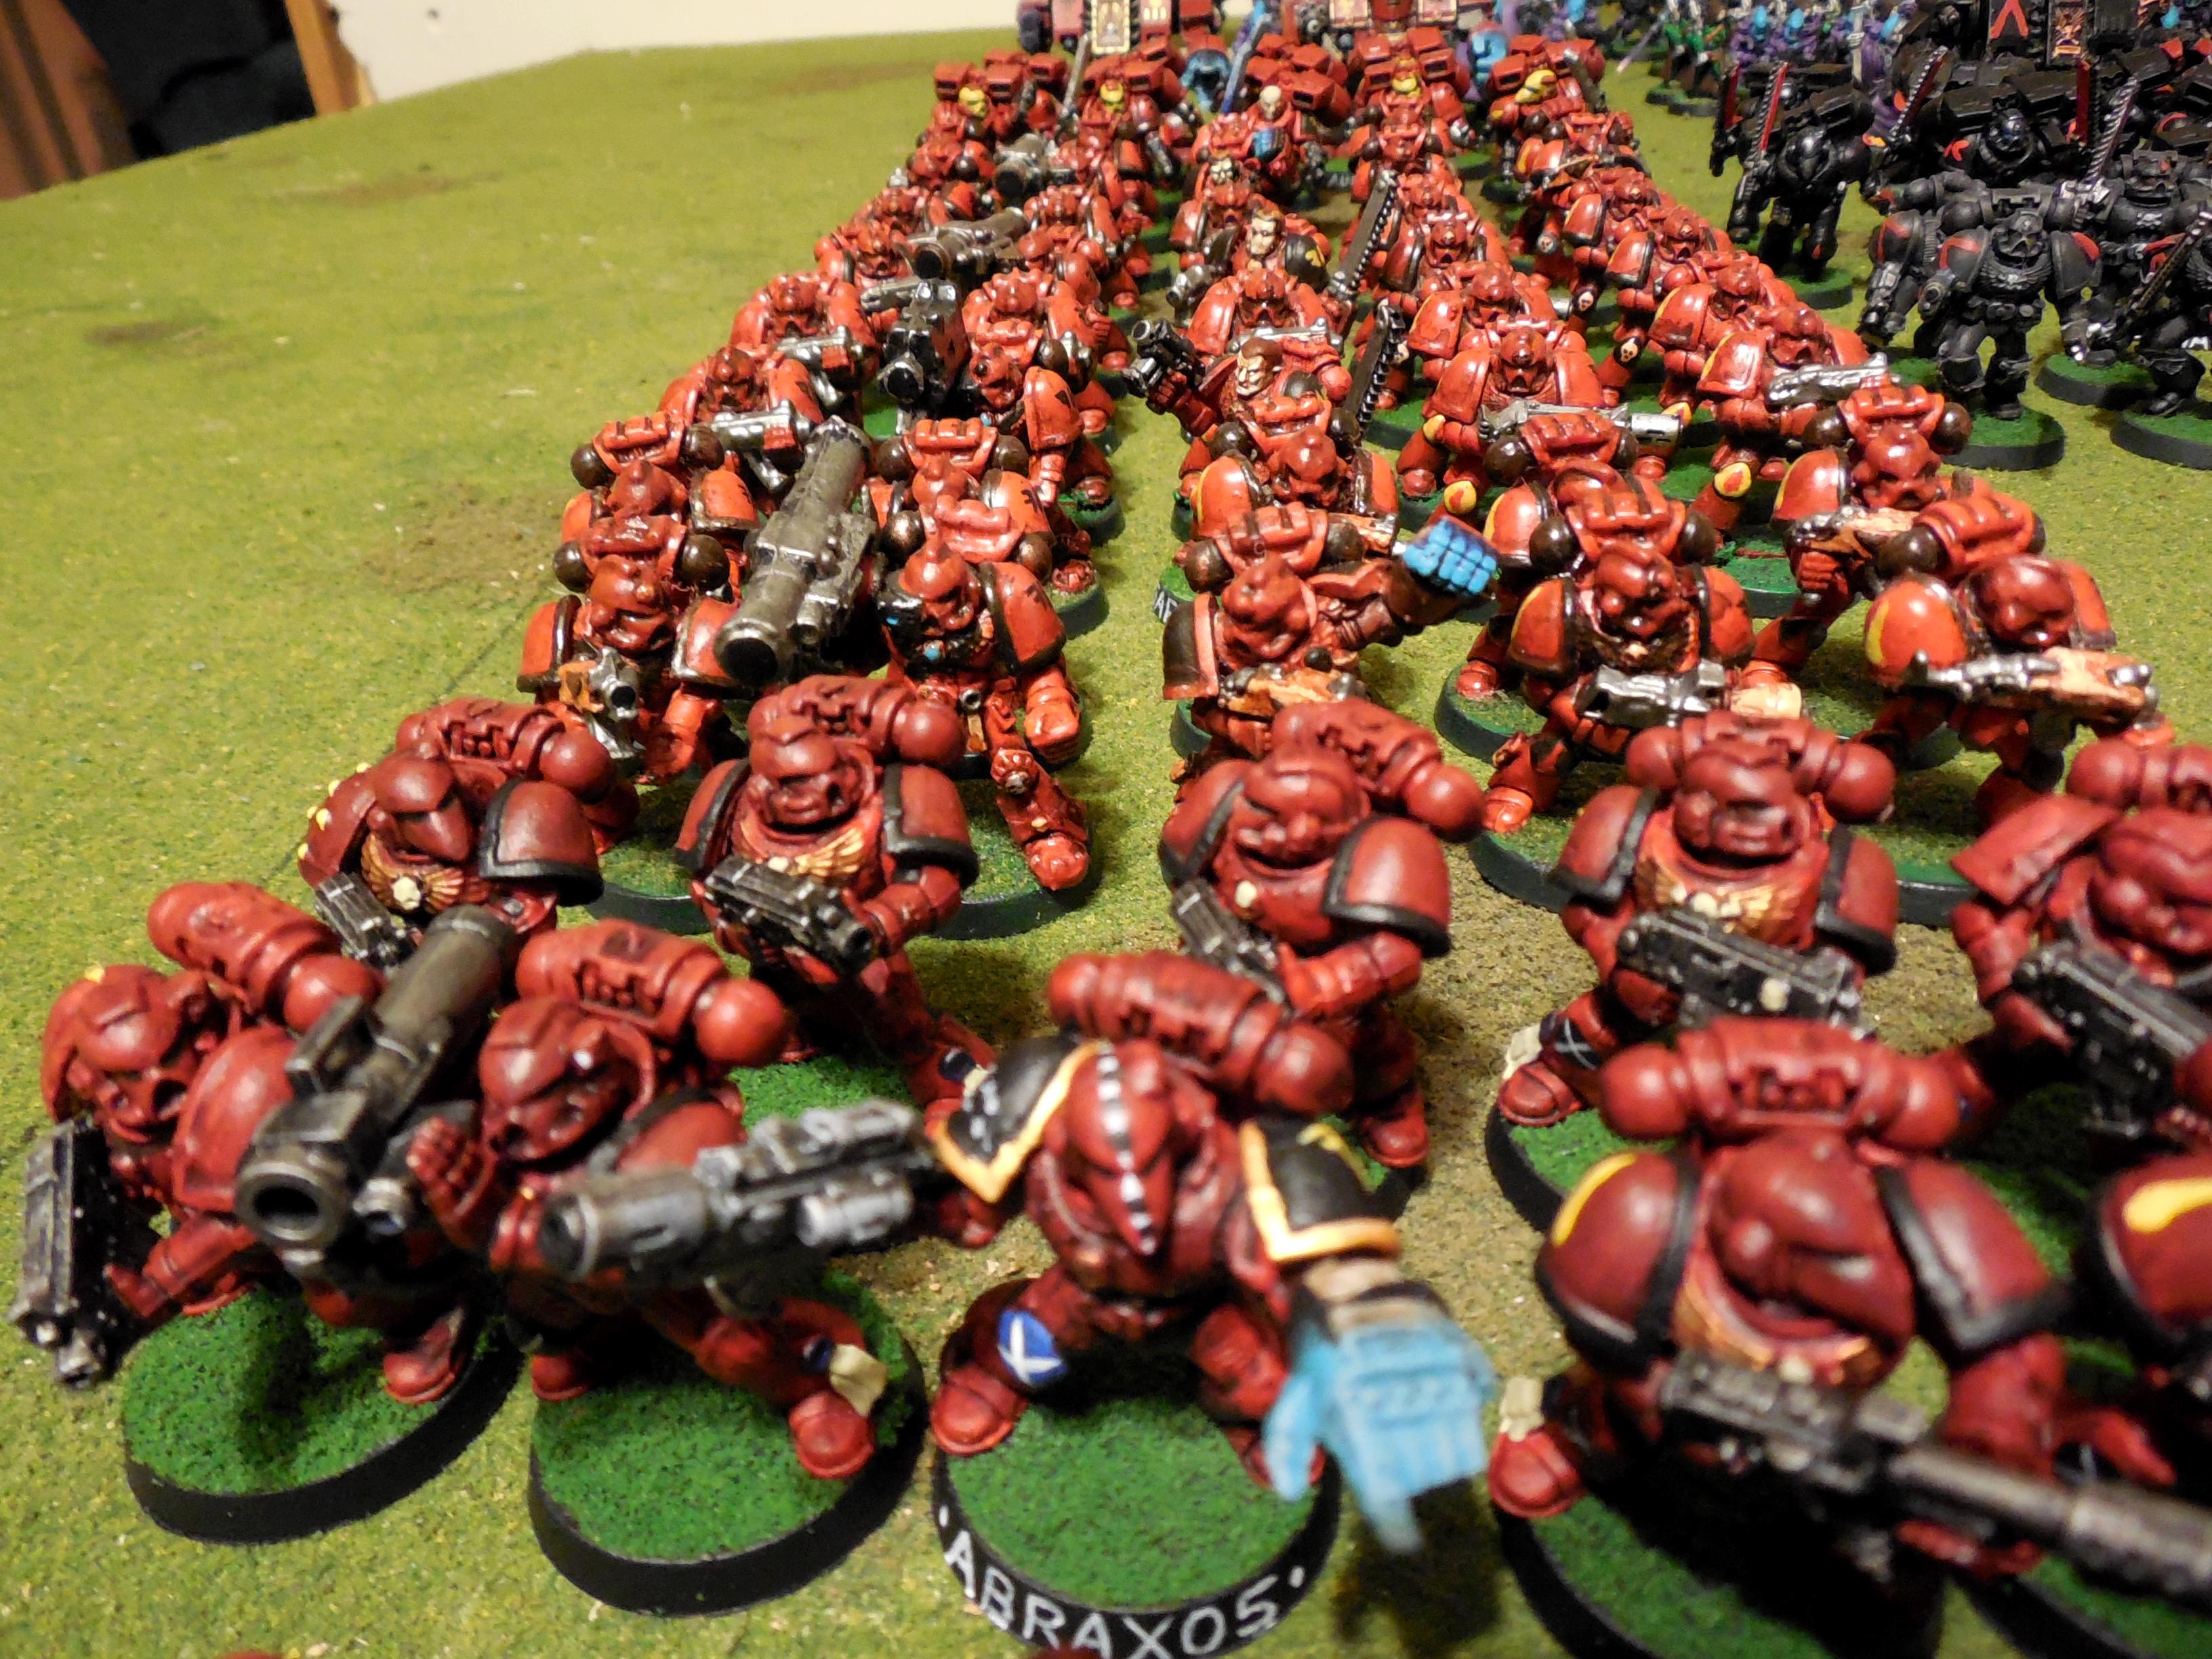 2nd Company Blood Angels, Blood Angels, Captain Aphiel, Dreadnought, Land Raider, Mephiston, Scratch Built Land Raiders, Space Marines, Storm Raven, The Blooded